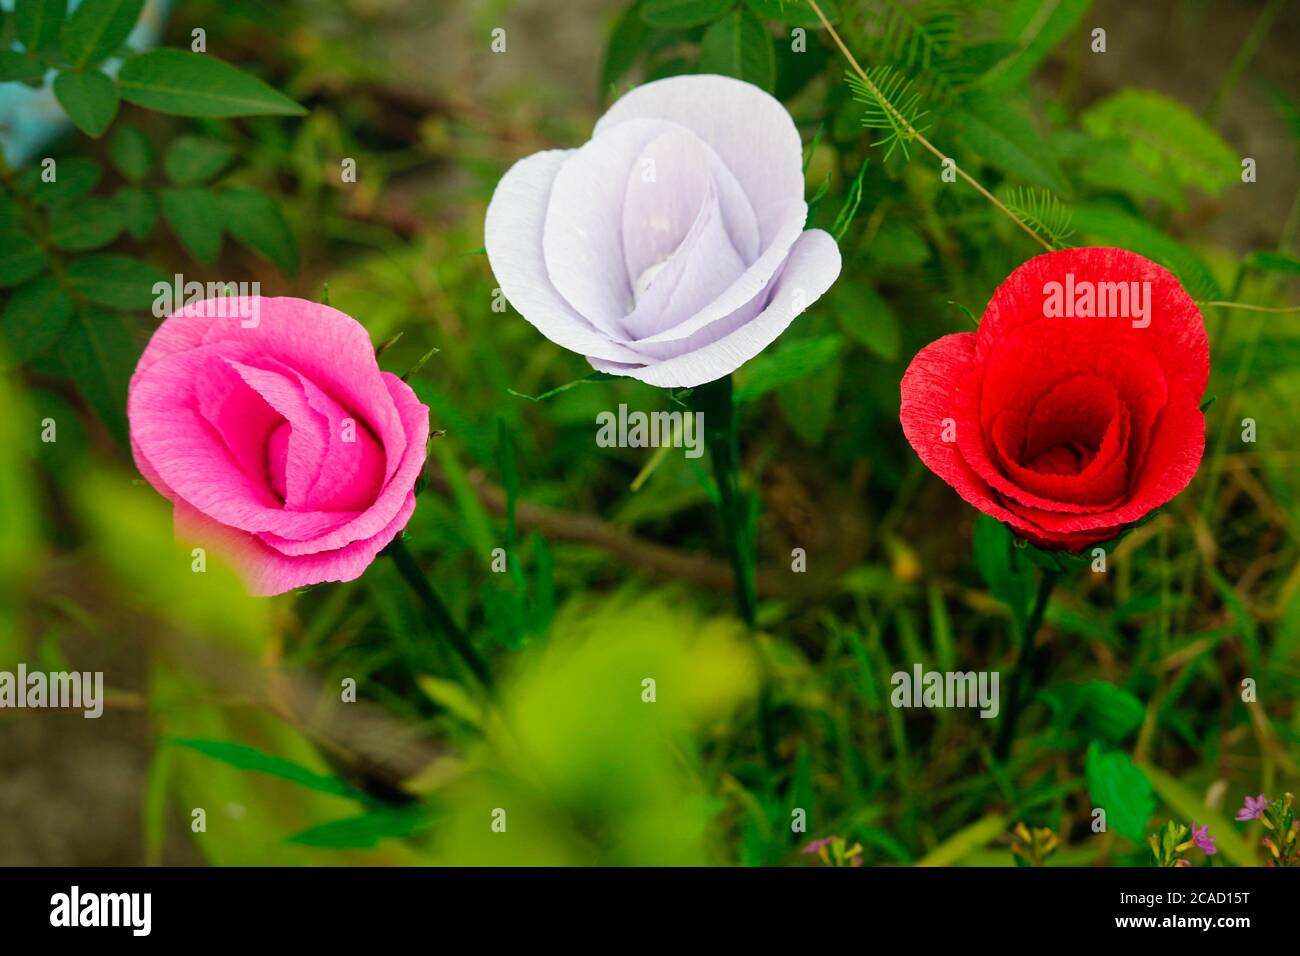 Colorful homemade origami paper flower, DIY floral paper craft, flower paper  style, DIY home decoration Stock Photo - Alamy